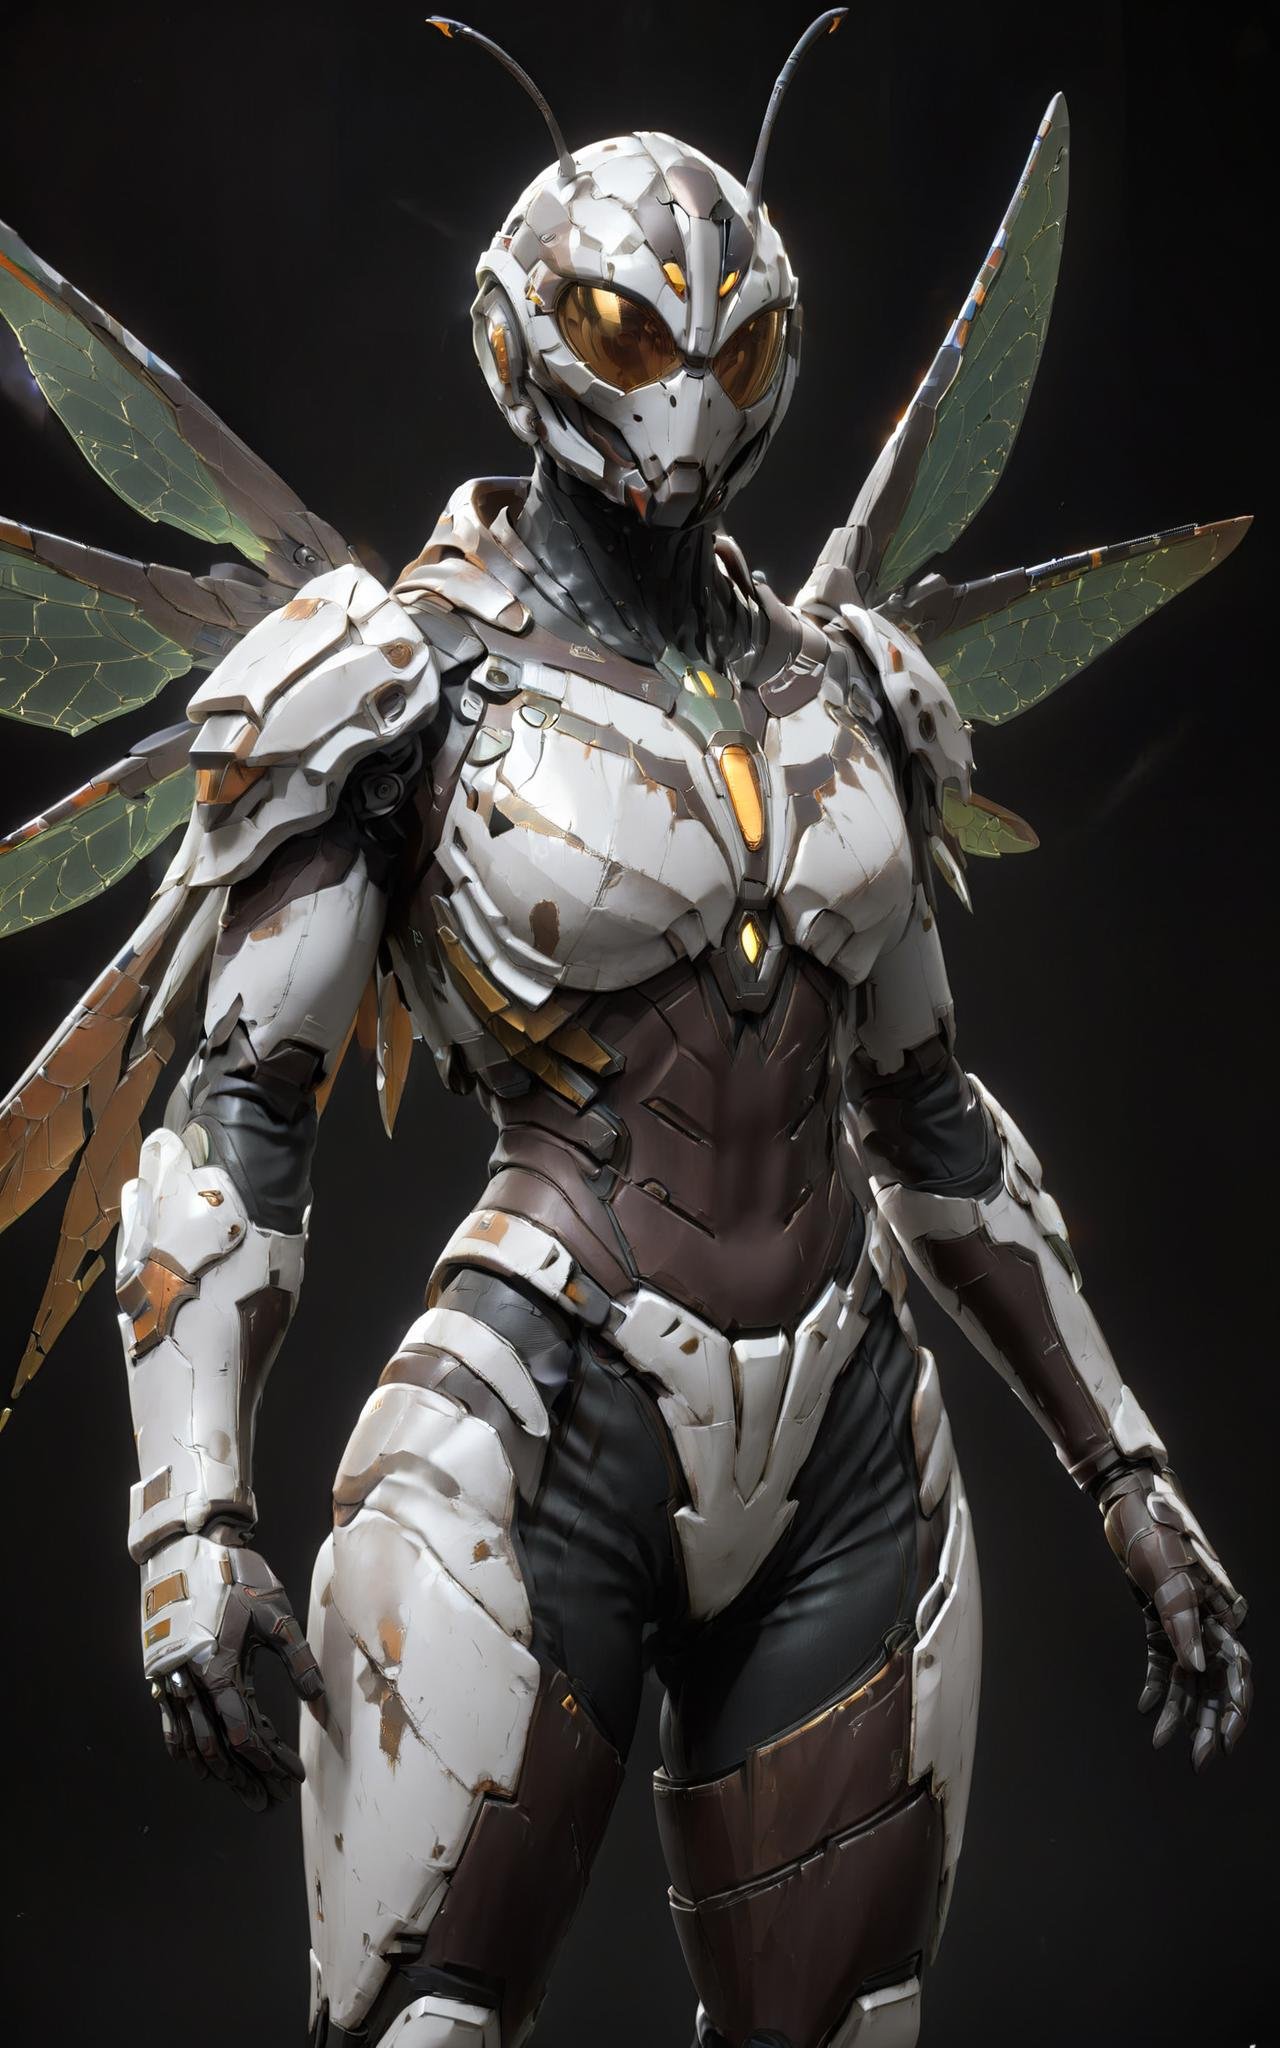 character name, monochrome, armor, upper body, brown gloves, insect wings, power suit, reference sheet, wings